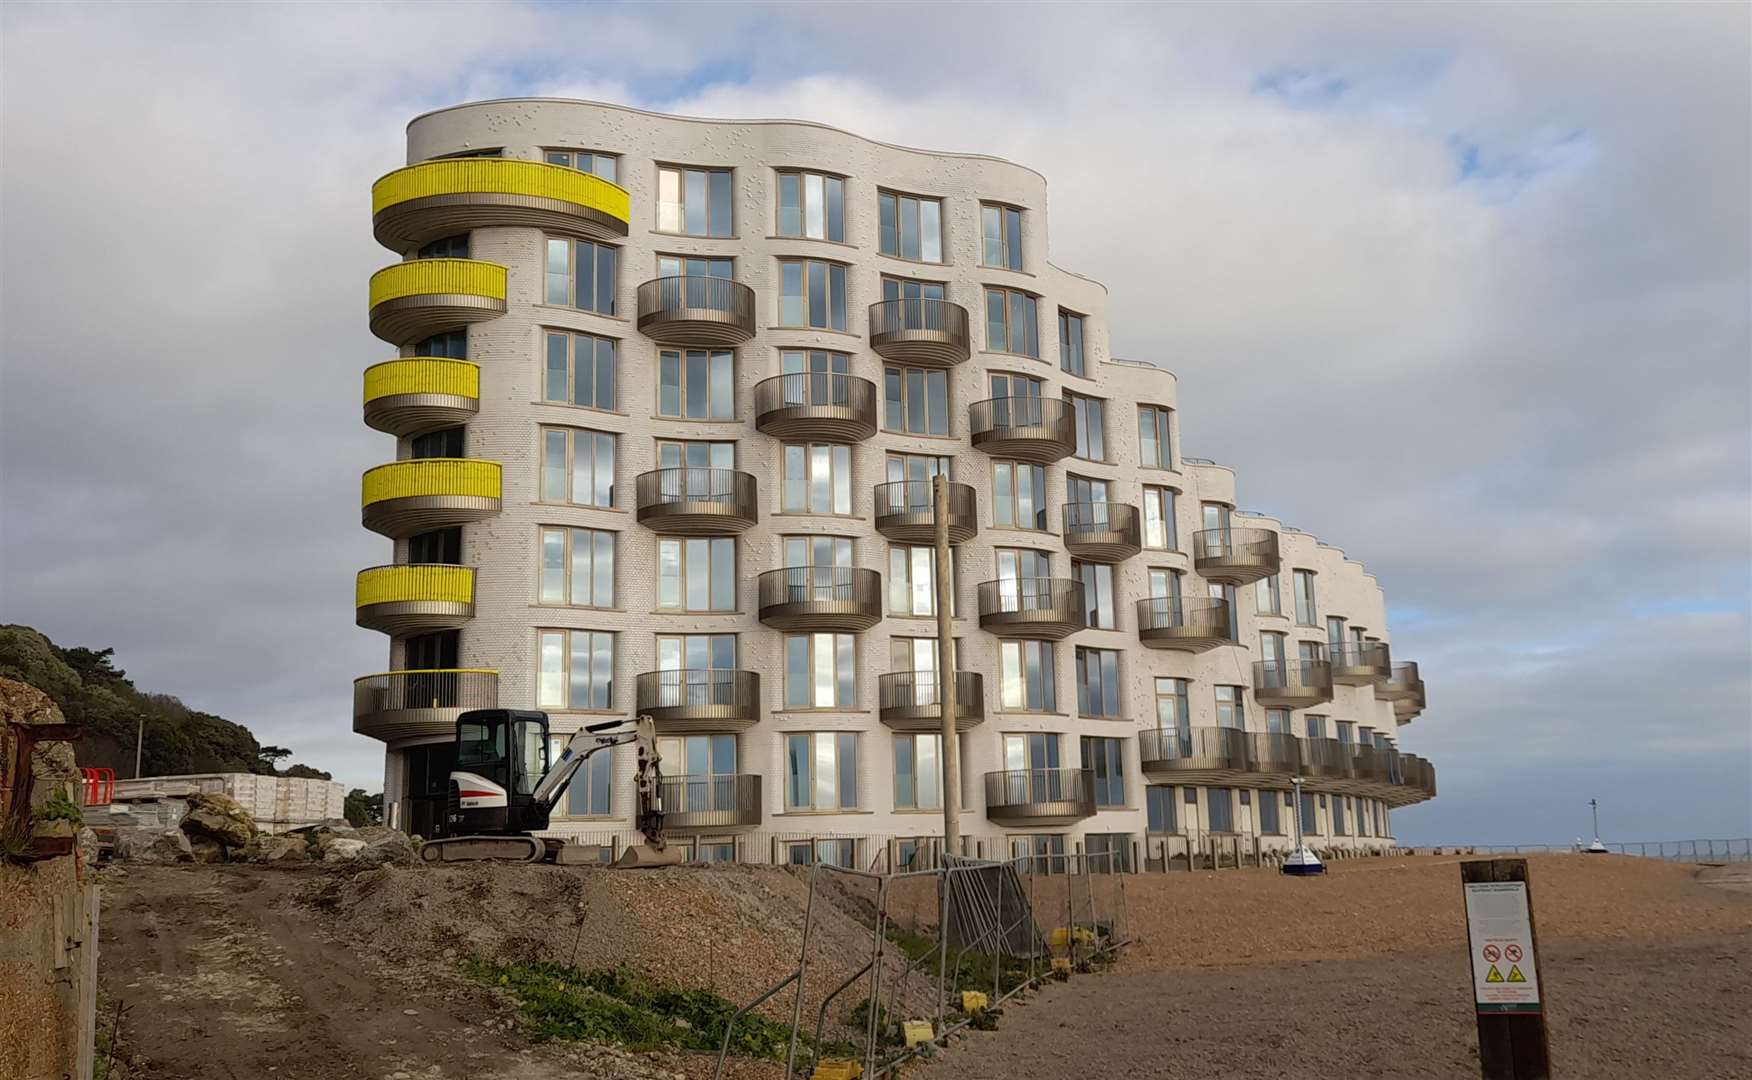 Townhouses at Shoreline Crescent on Folkestone beach start at £1.85 million and flats at £430,000